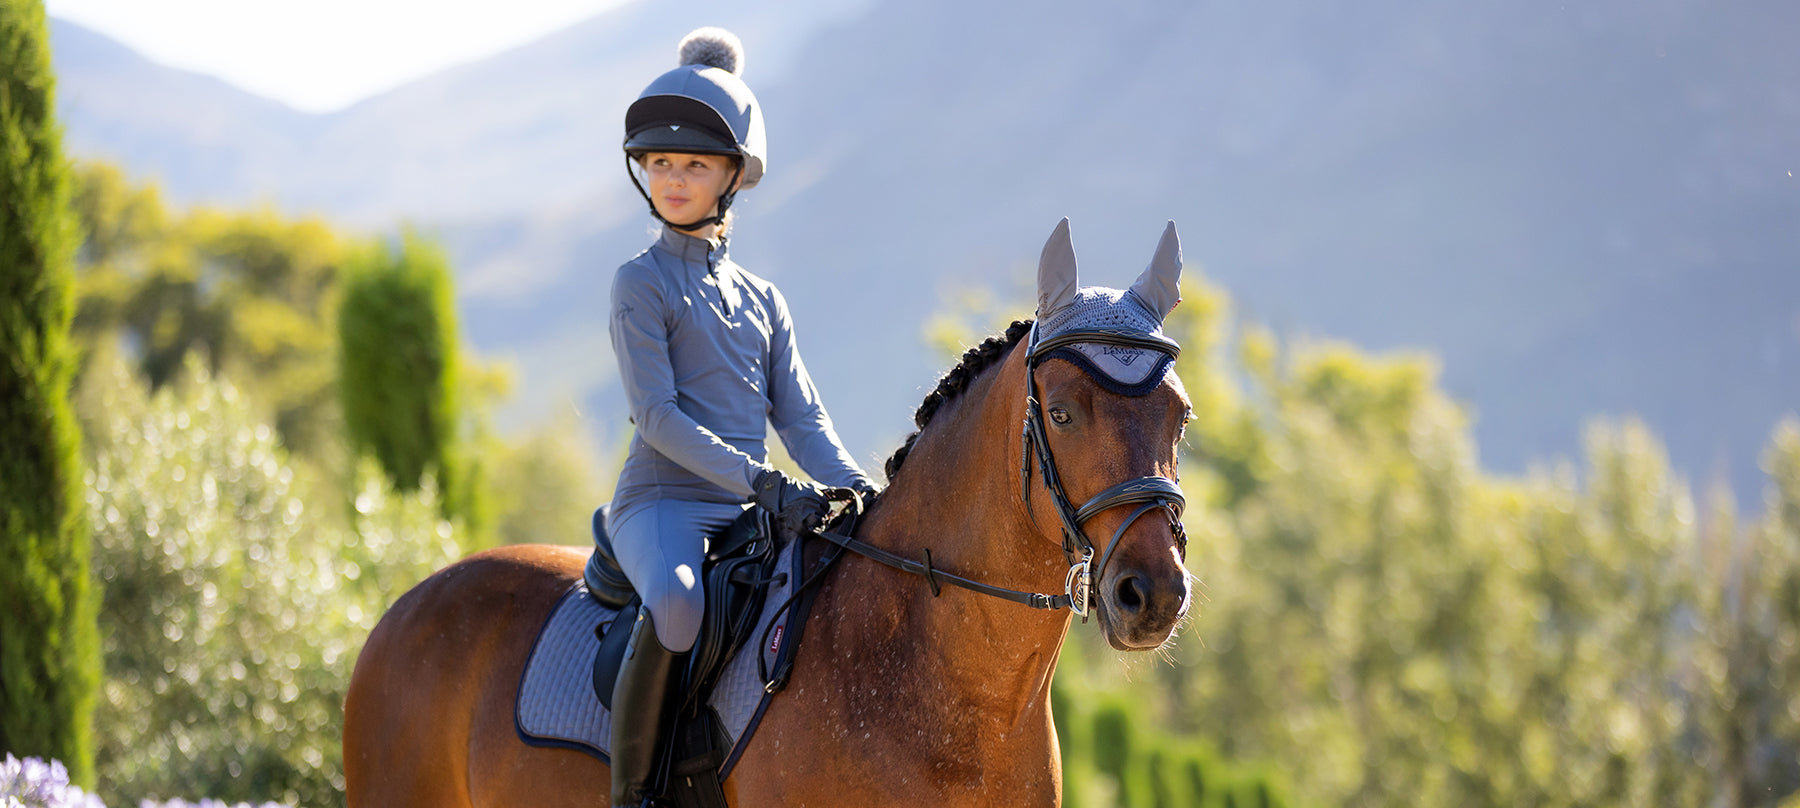 LeMieux Young Rider in Jay Blue Baselayer